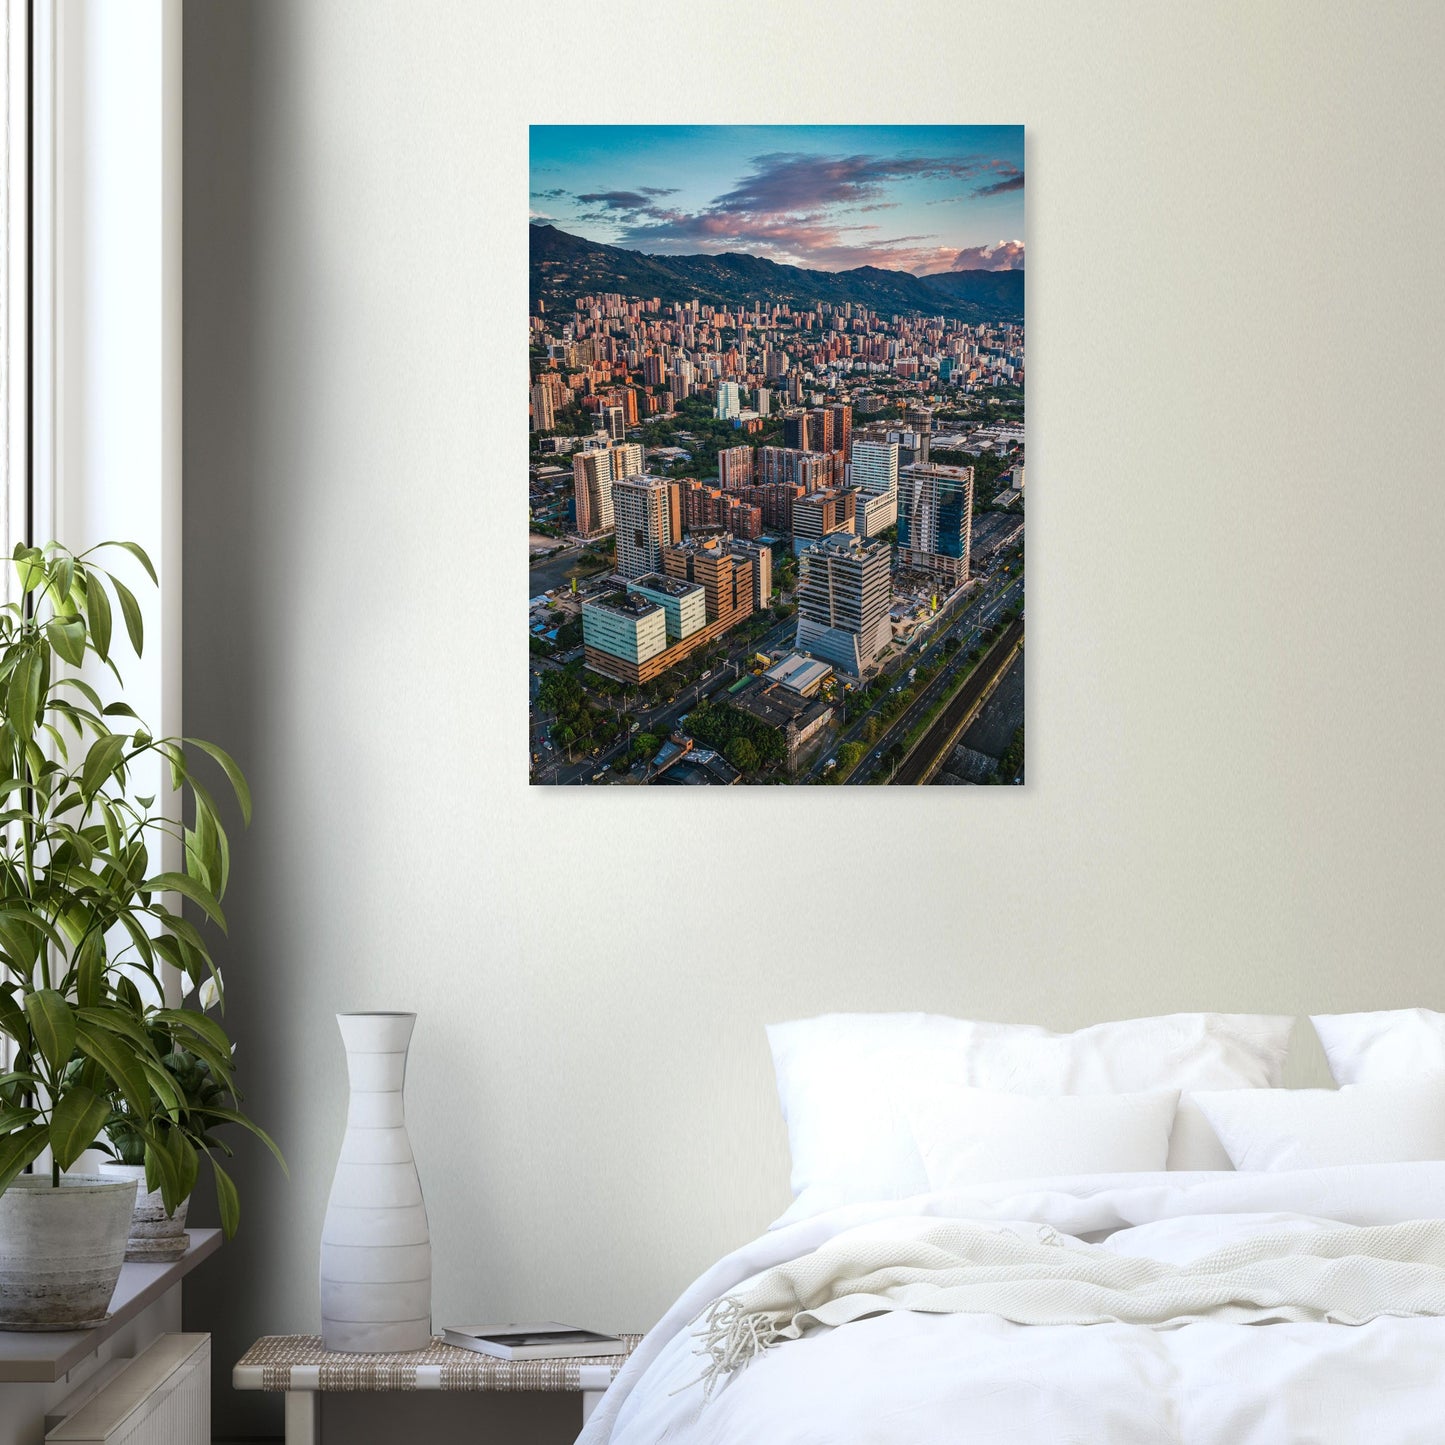 Rooftops of Medellin, Colombia Poster